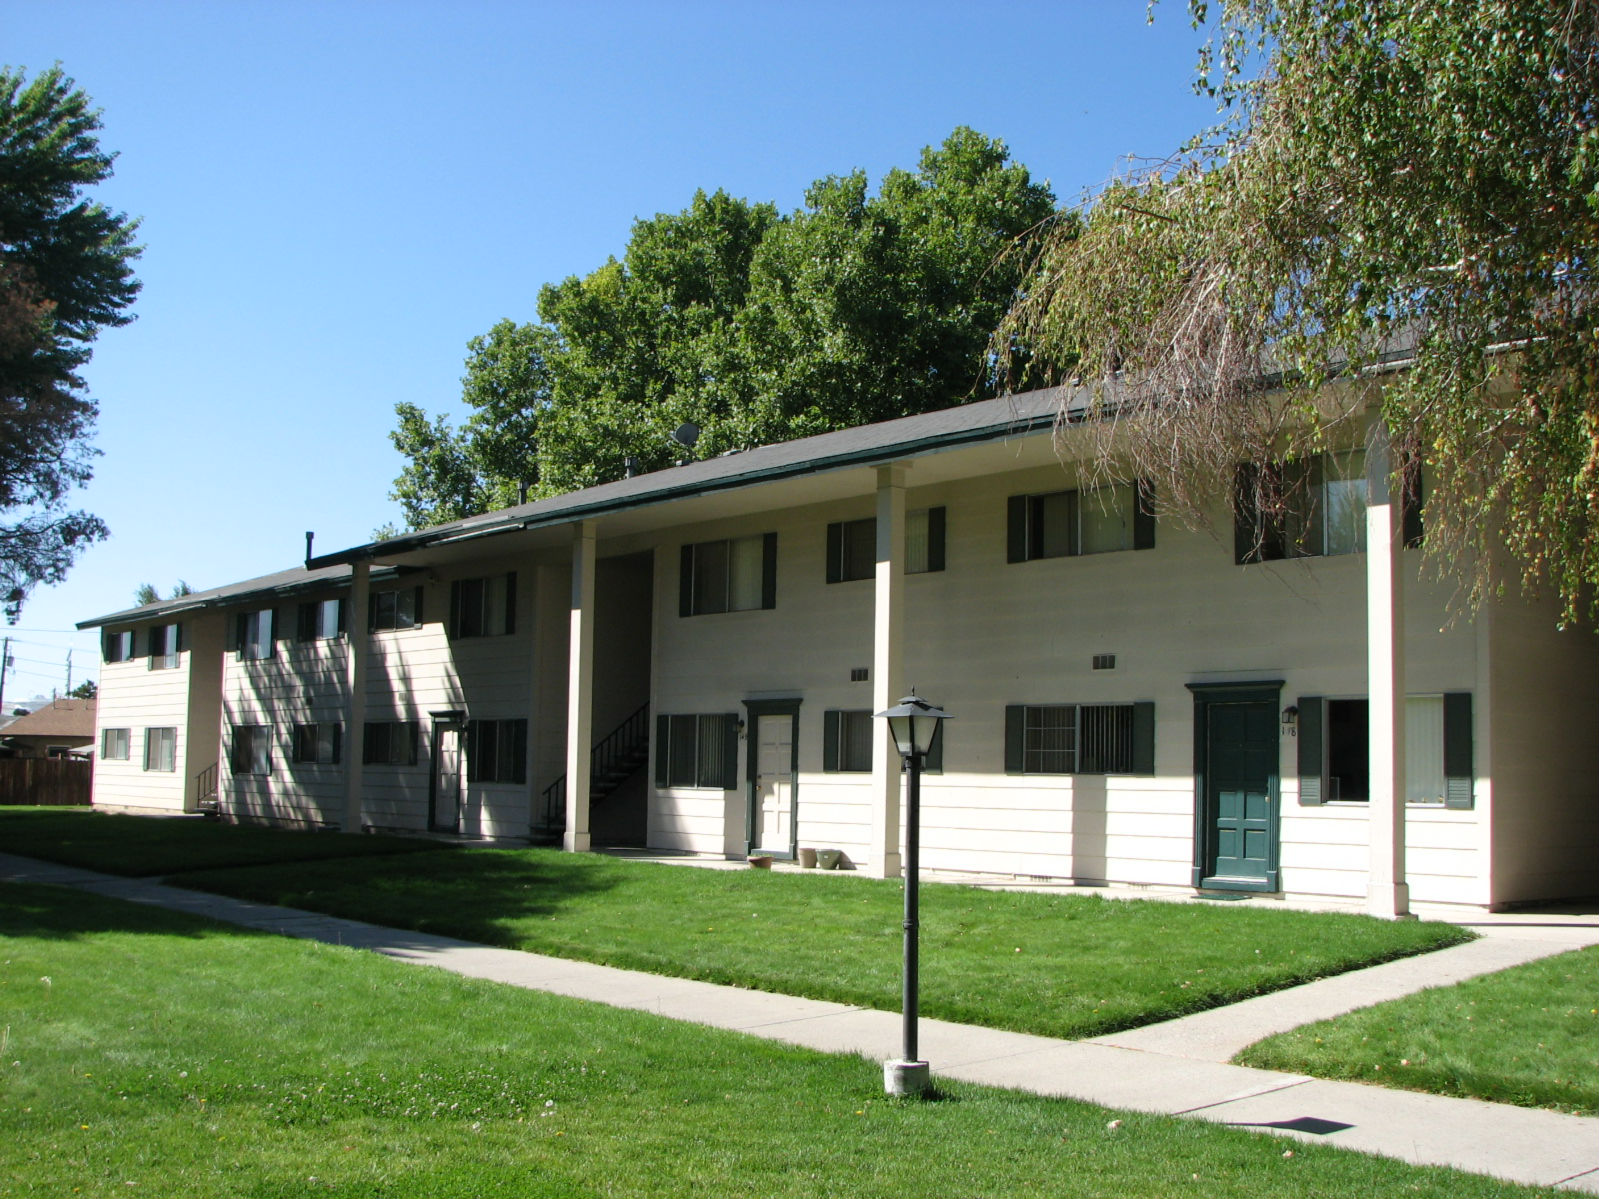 Lincoln Garden Apartments Sparks Nv Apartments For Rent In